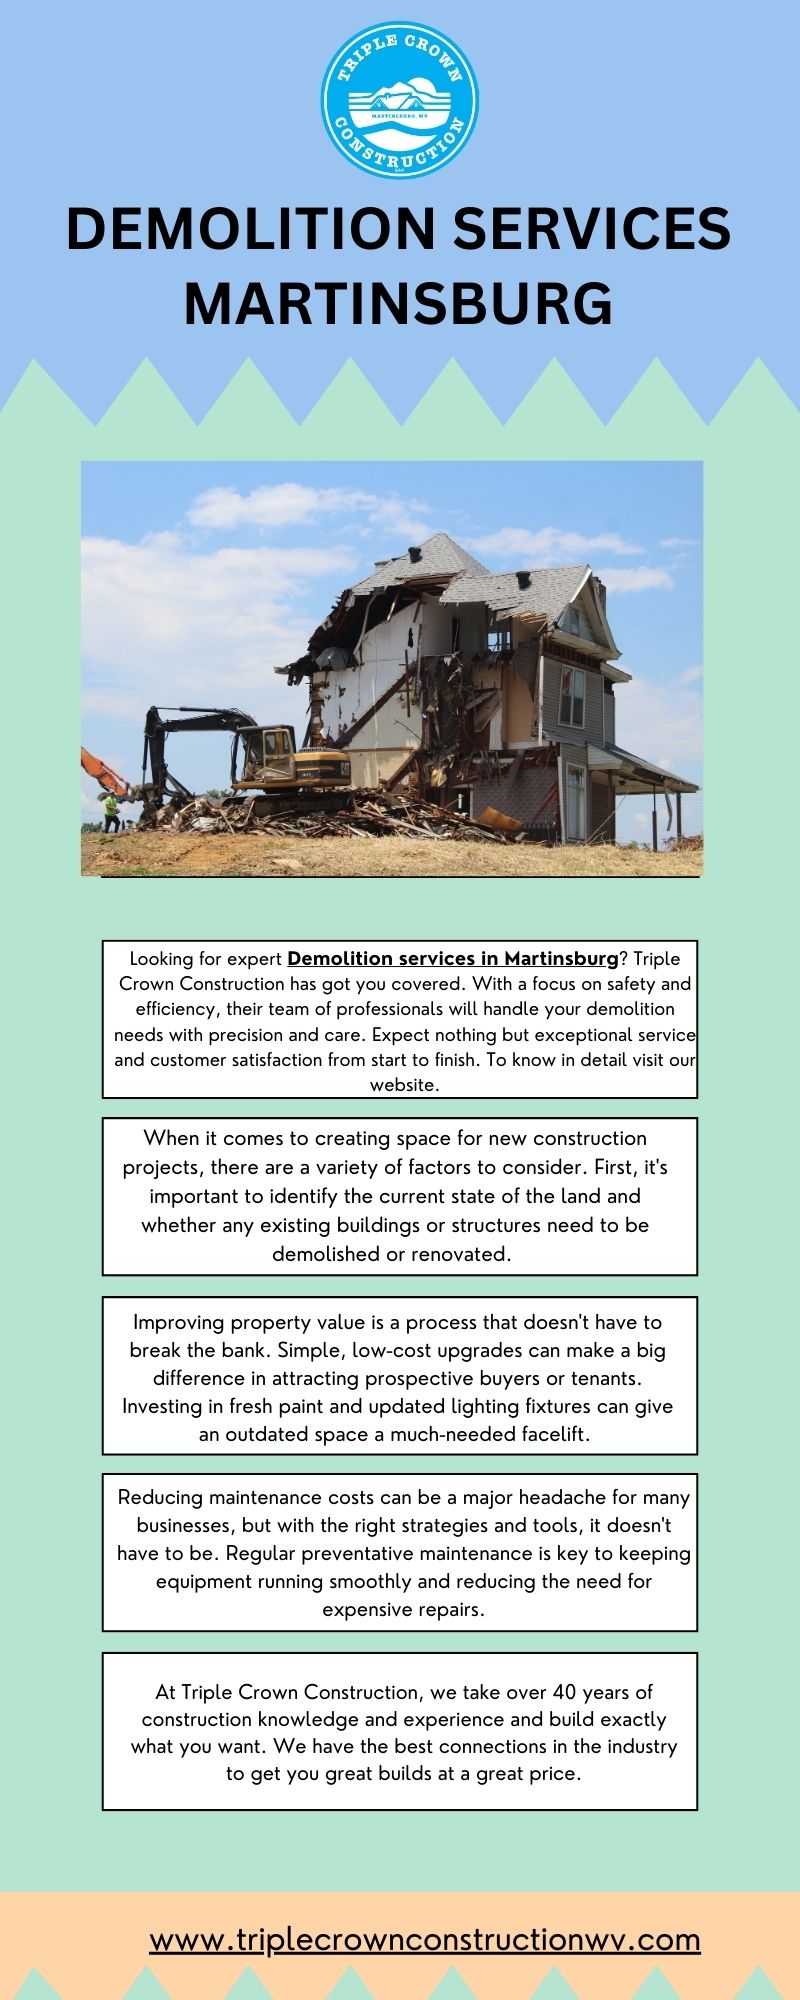 Find Out The Best Demolition Services in Martinsburg!